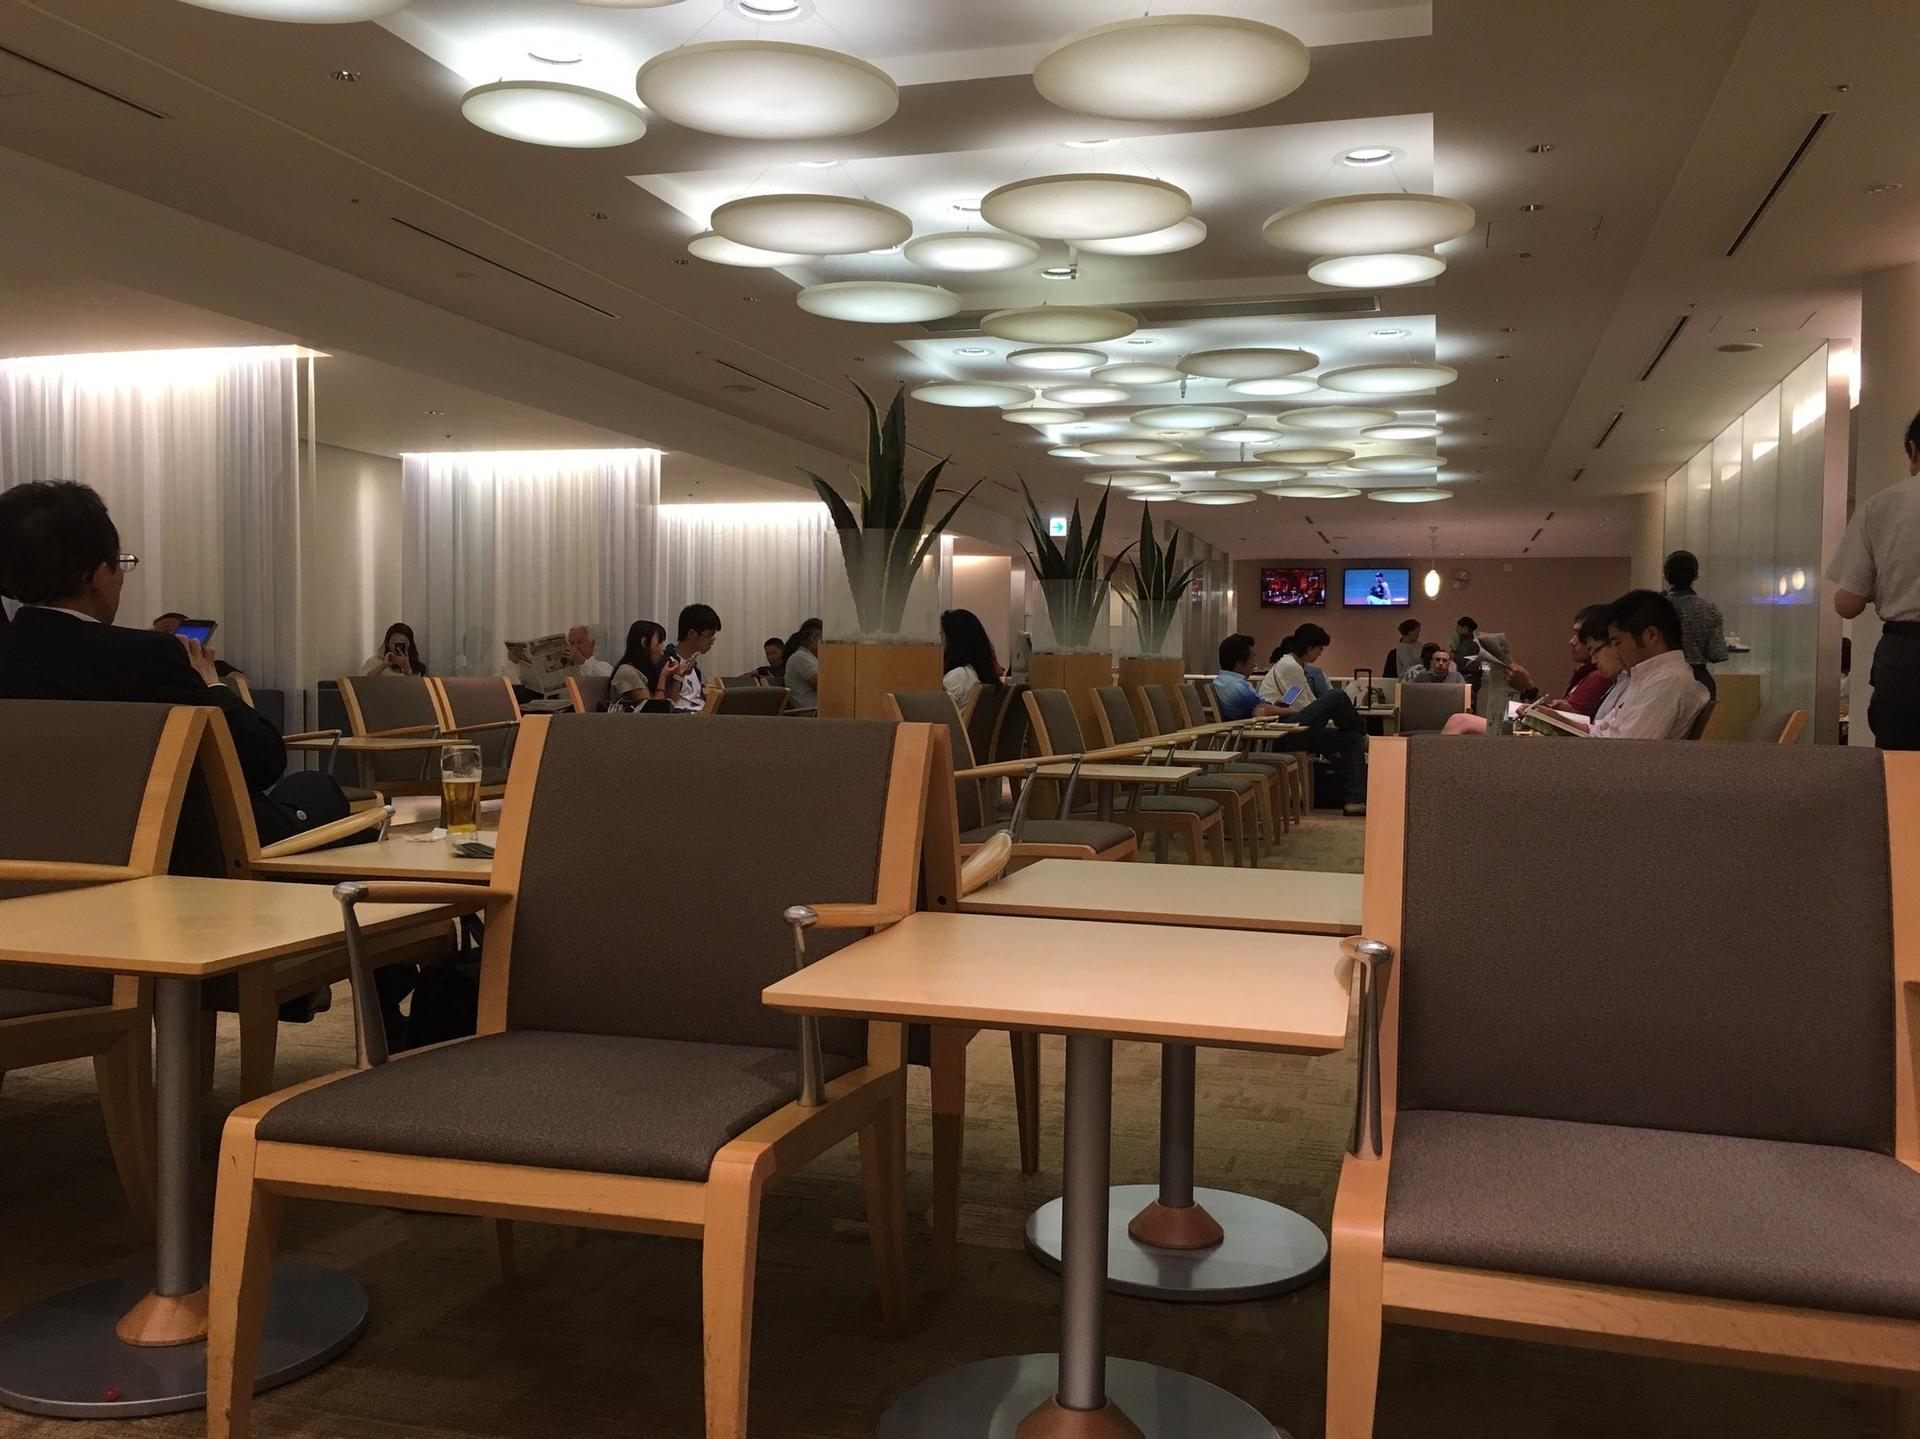 All Nippon Airways ANA Arrival Lounge image 8 of 11